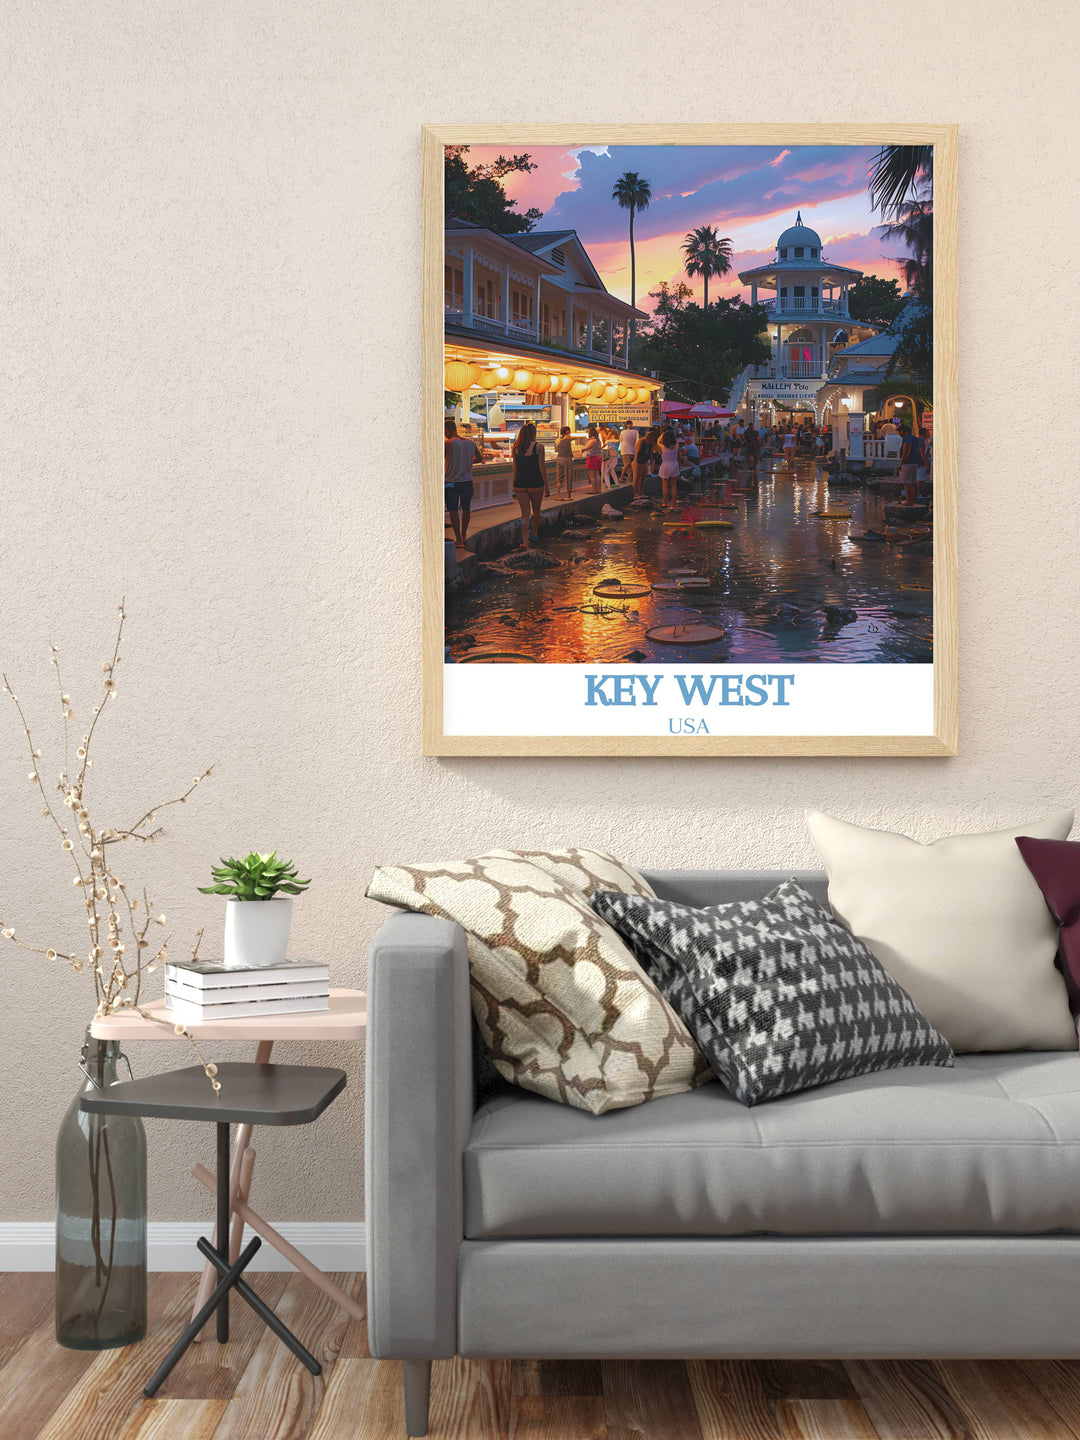 Unique Florida Travel Gift featuring a detailed print of Mallory Square perfect for sharing the beauty and cultural richness of Key West with loved ones.